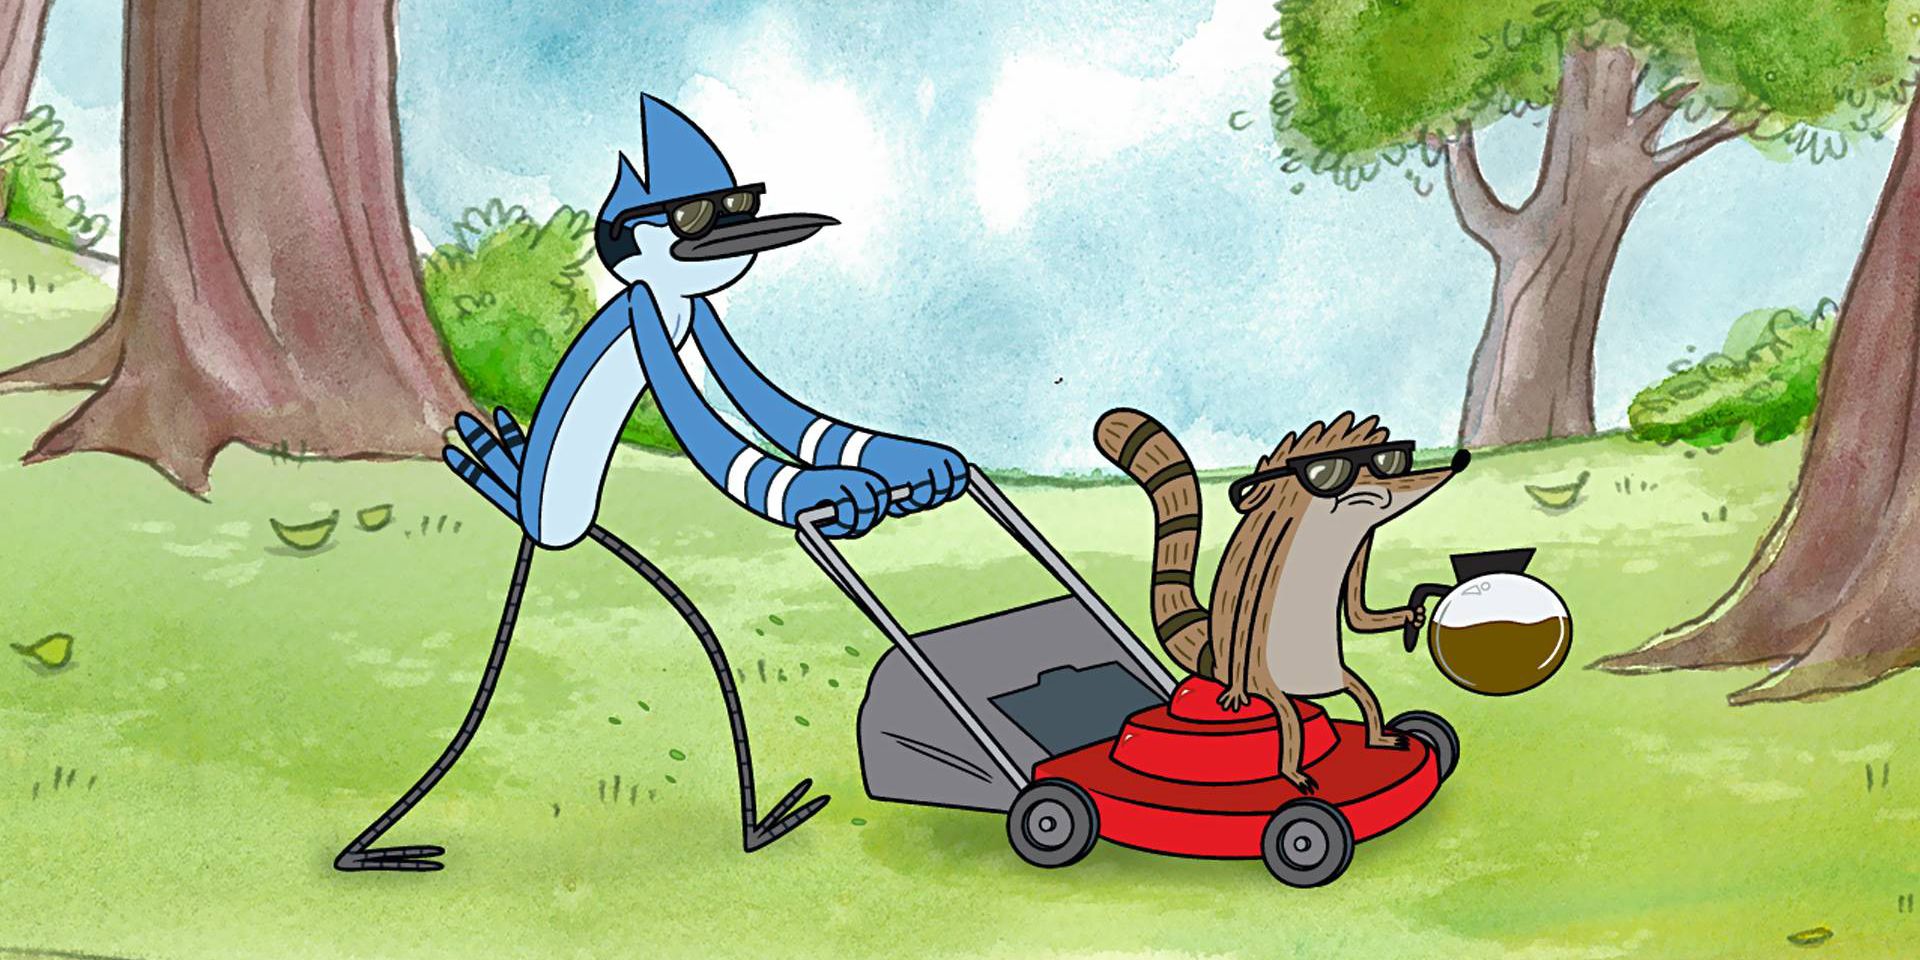 Mordecai pushes Rigby on a lawnmower in Regular Show